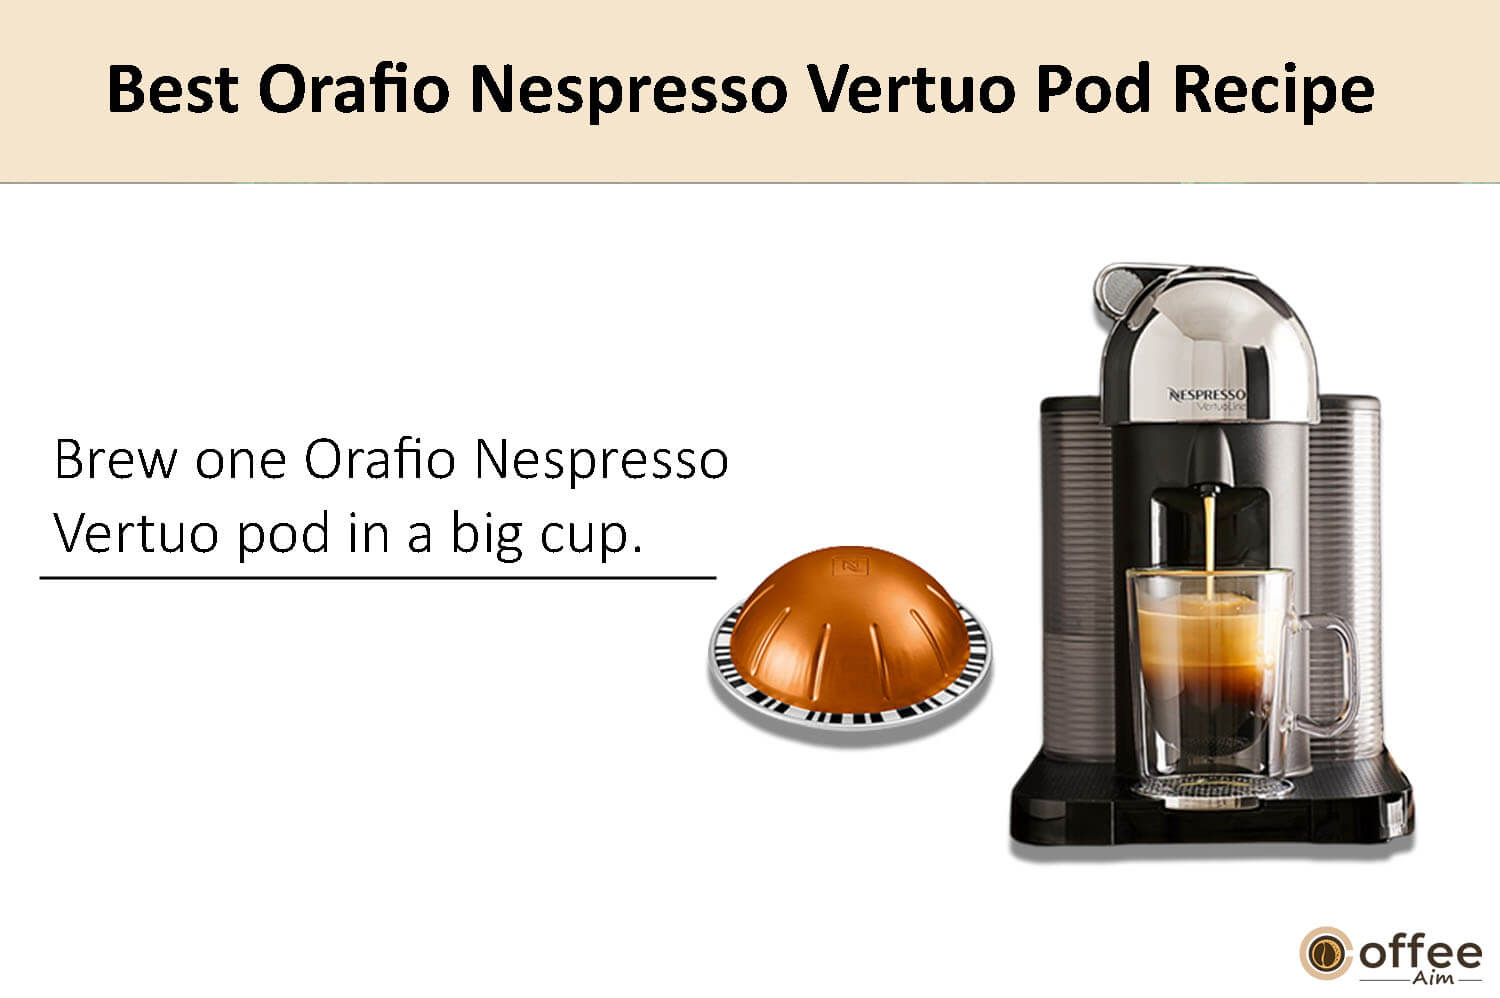 In this image, I clarify the preparation instructions for crafting the finest Orafio Nespresso Vertuo coffee pod.